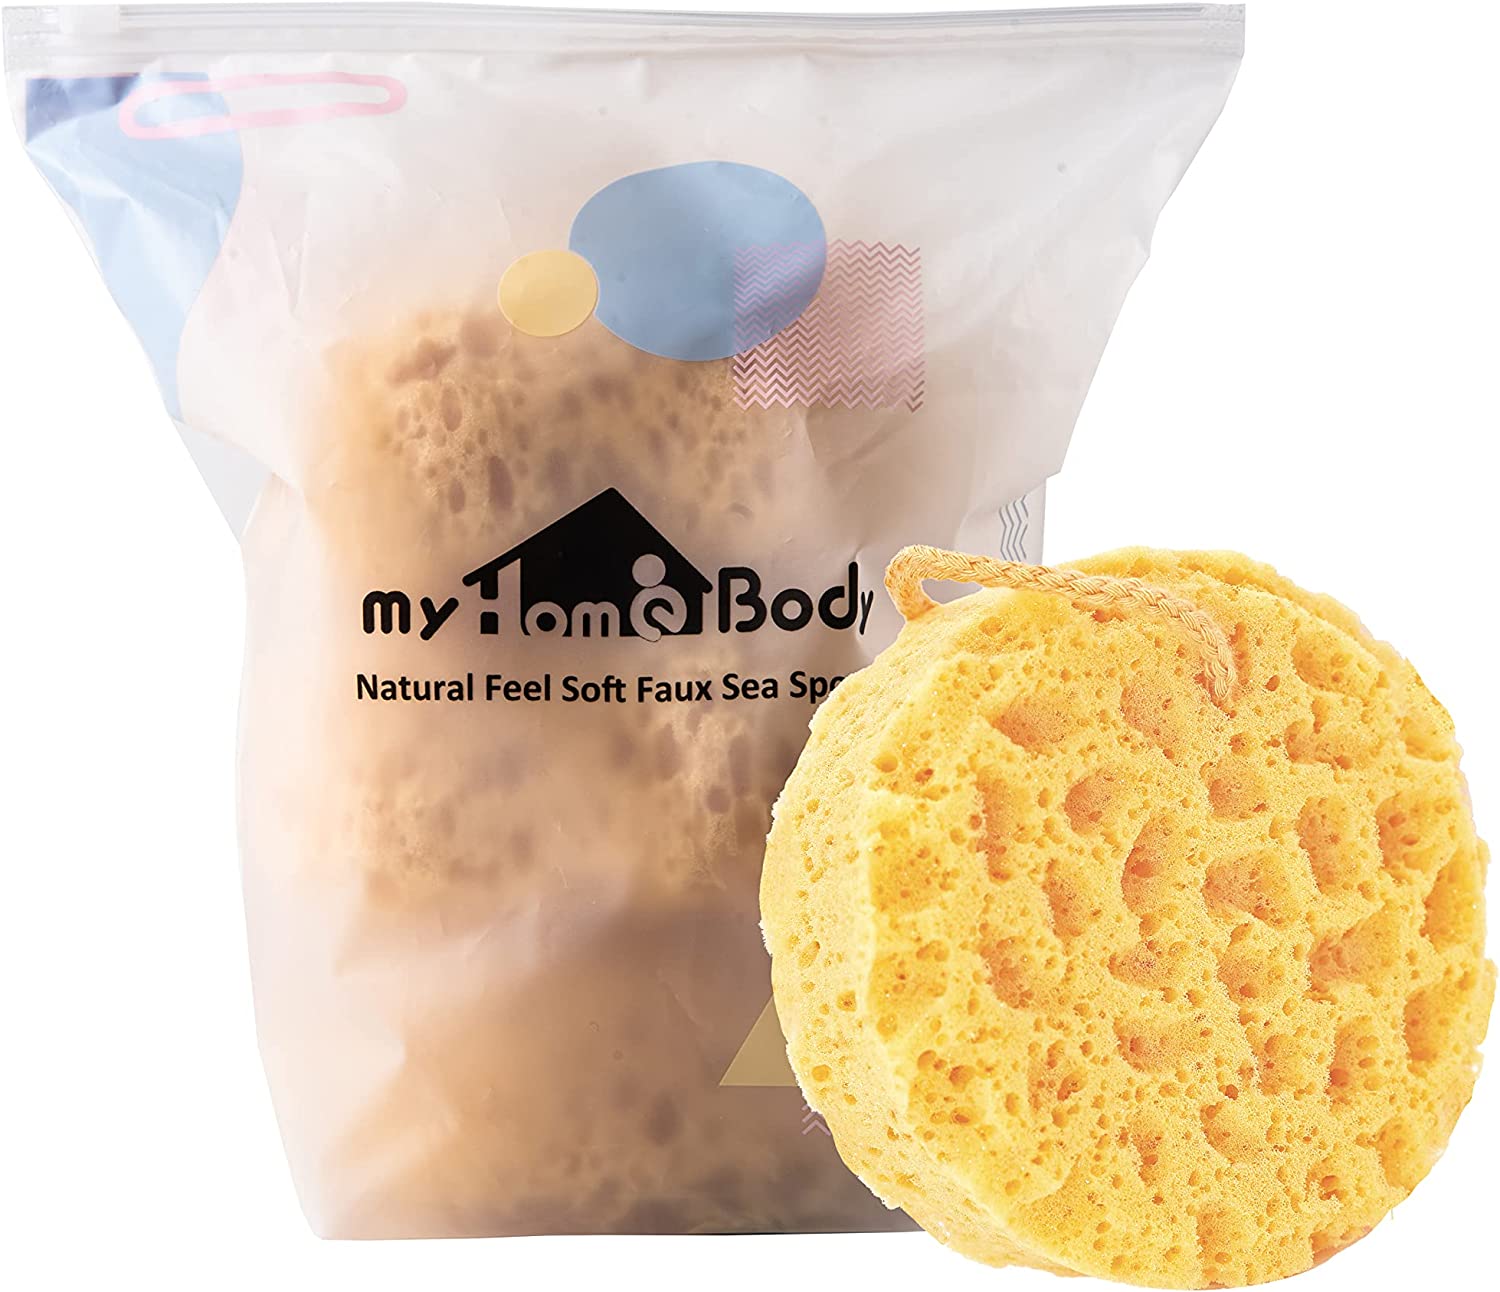 Void-Fill, Soft And Durable pu foam sponge For Sale 